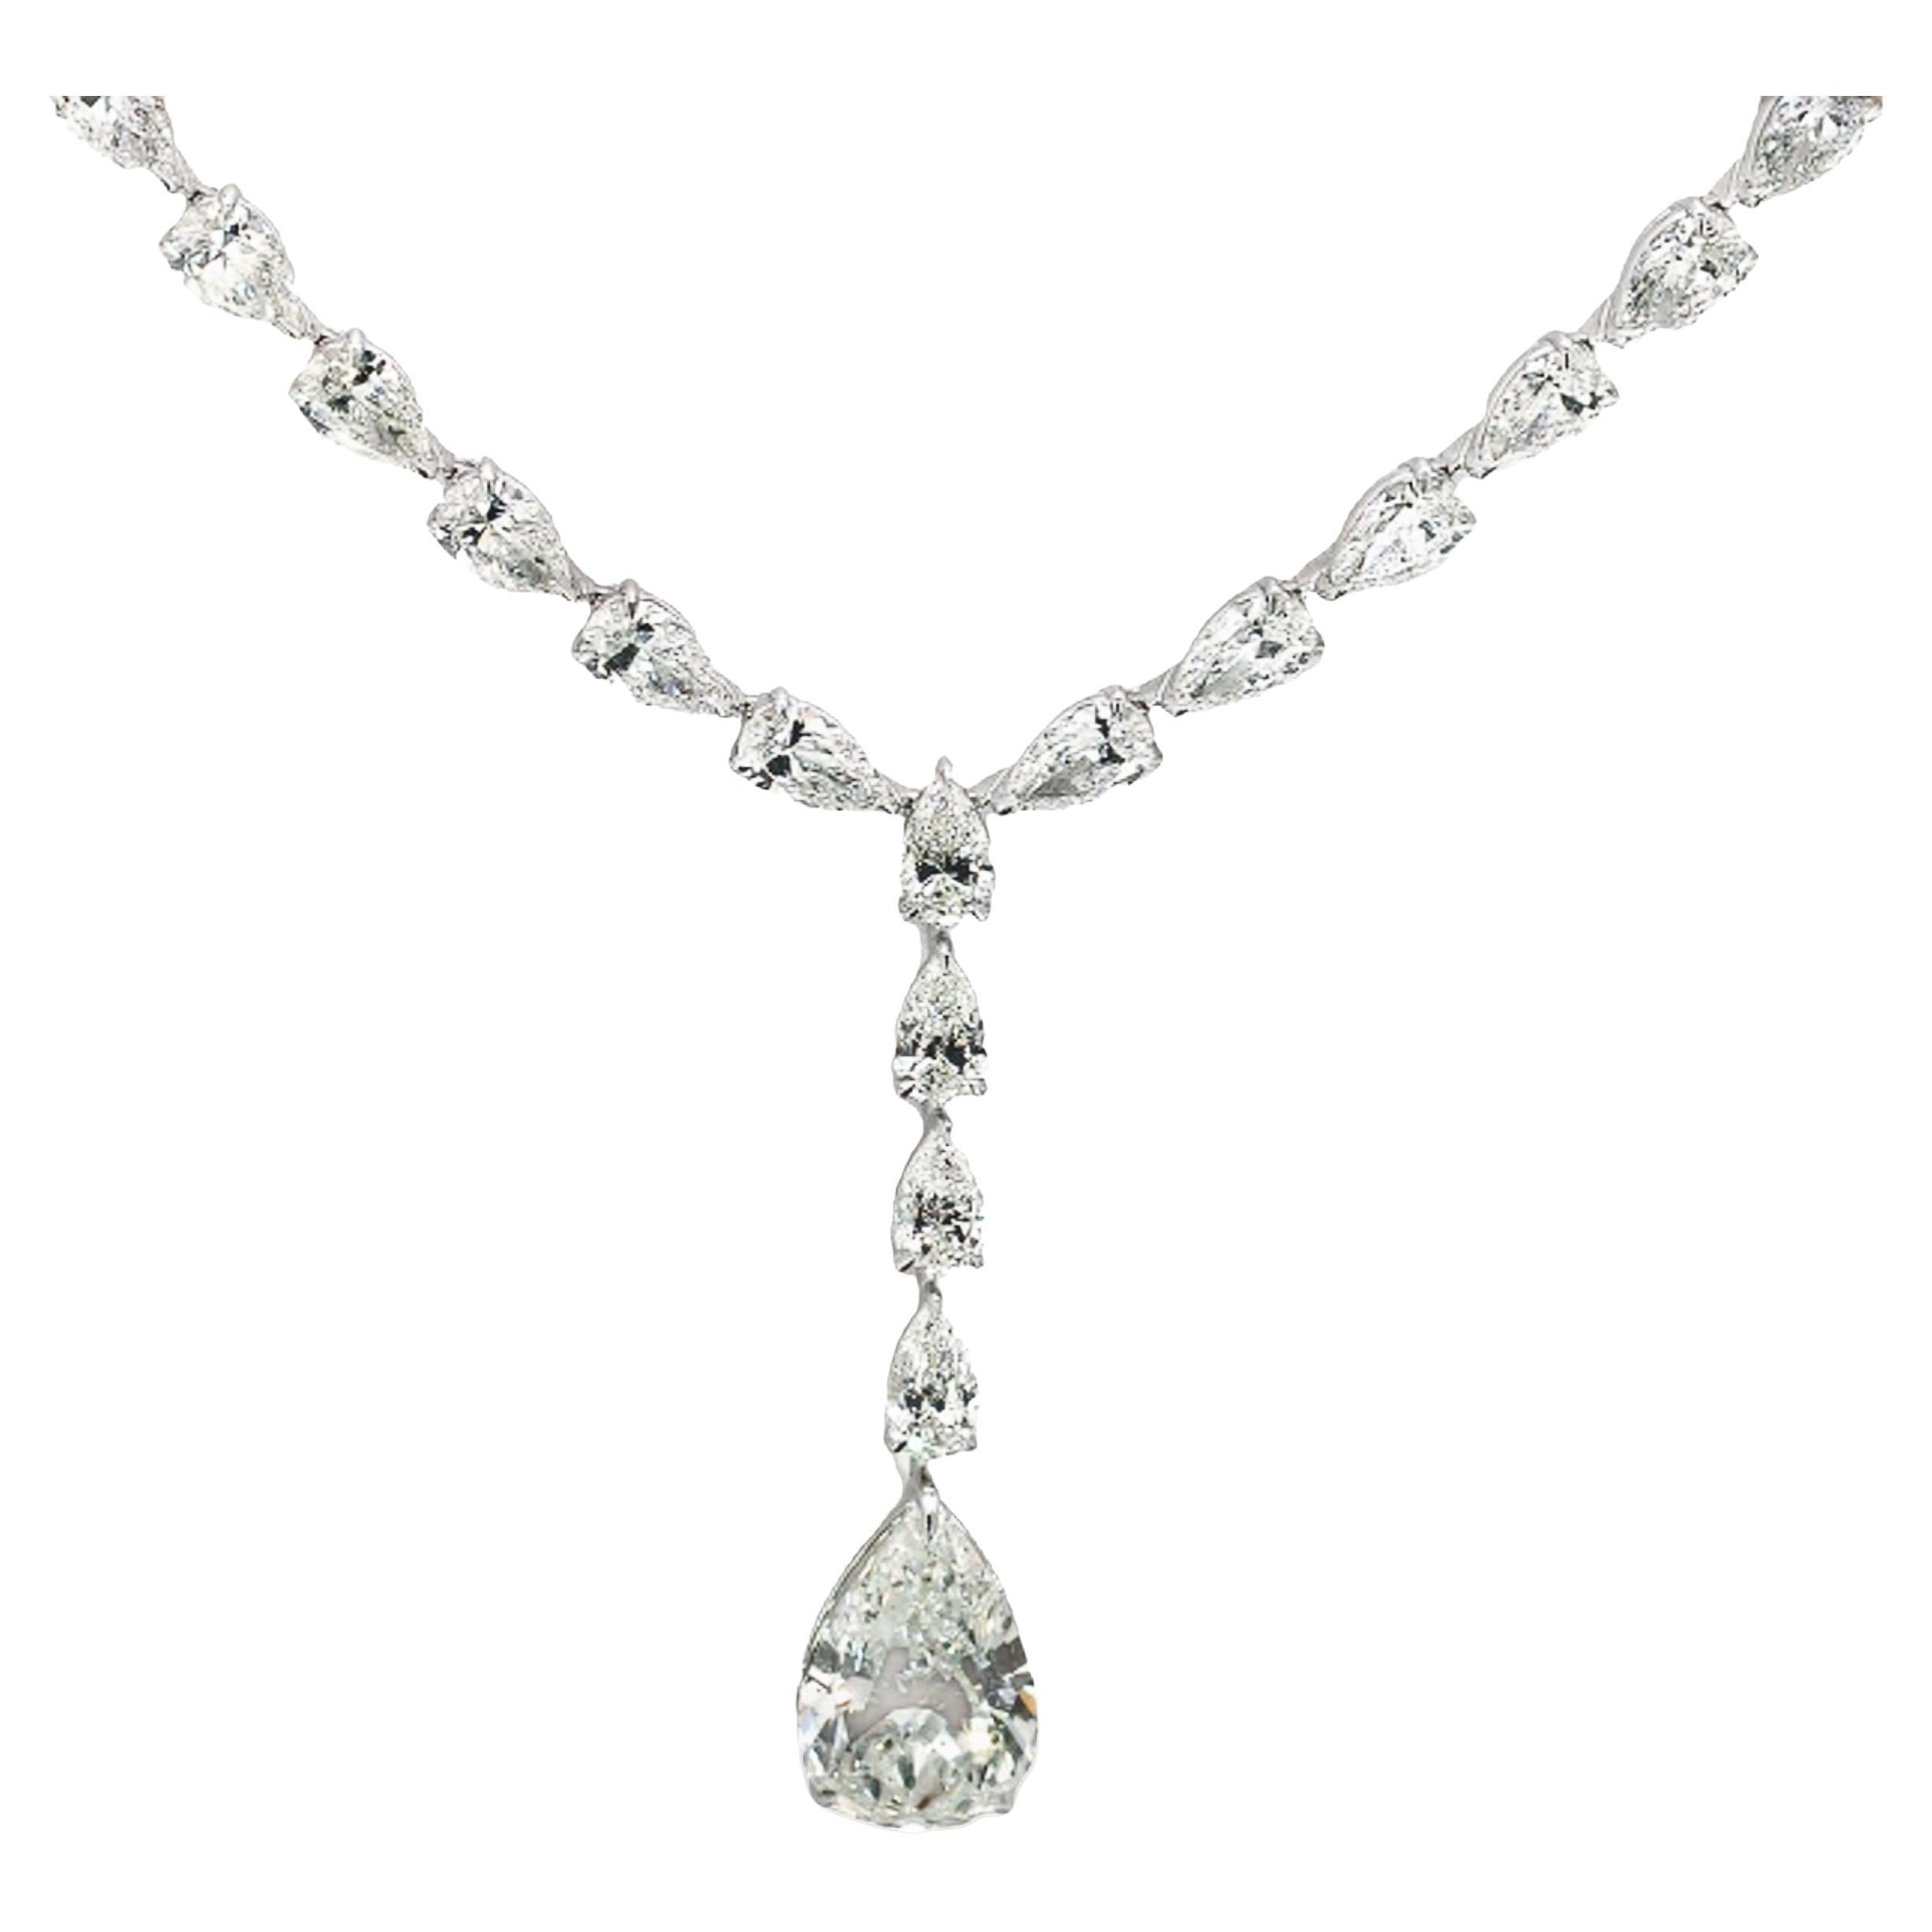 Dangling Tennis Necklace with Pear Shape Diamonds.  D36.13ct.t.w.